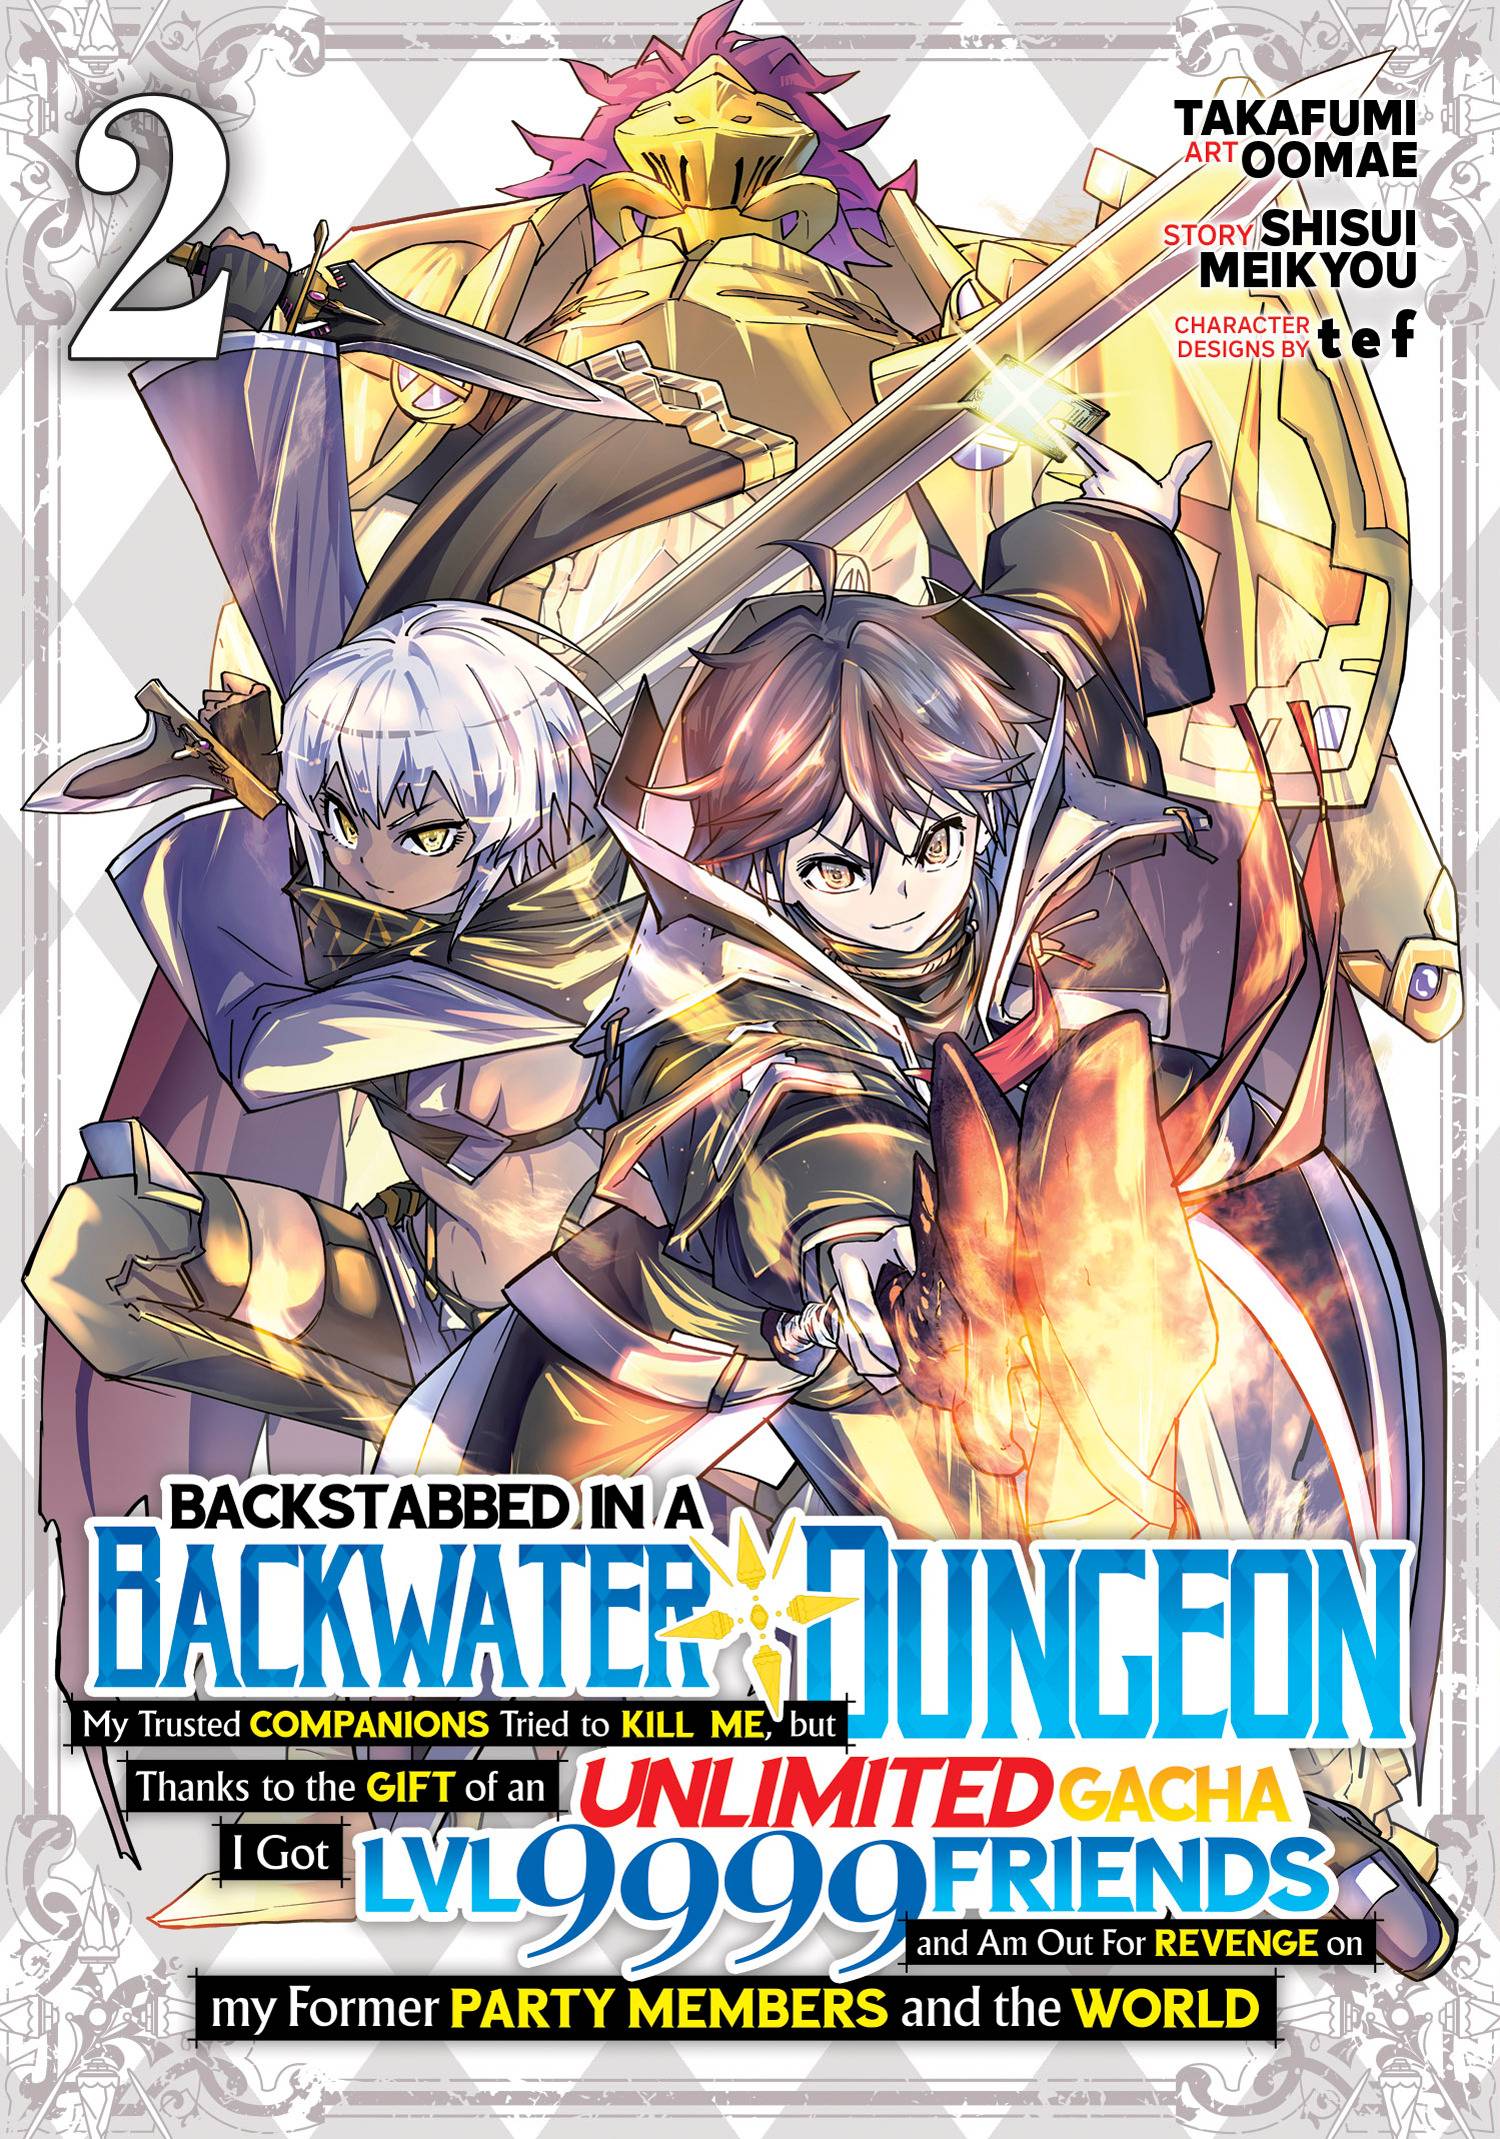 BACKSTABBED IN A BACKWATER DUNGEON GN VOL 02